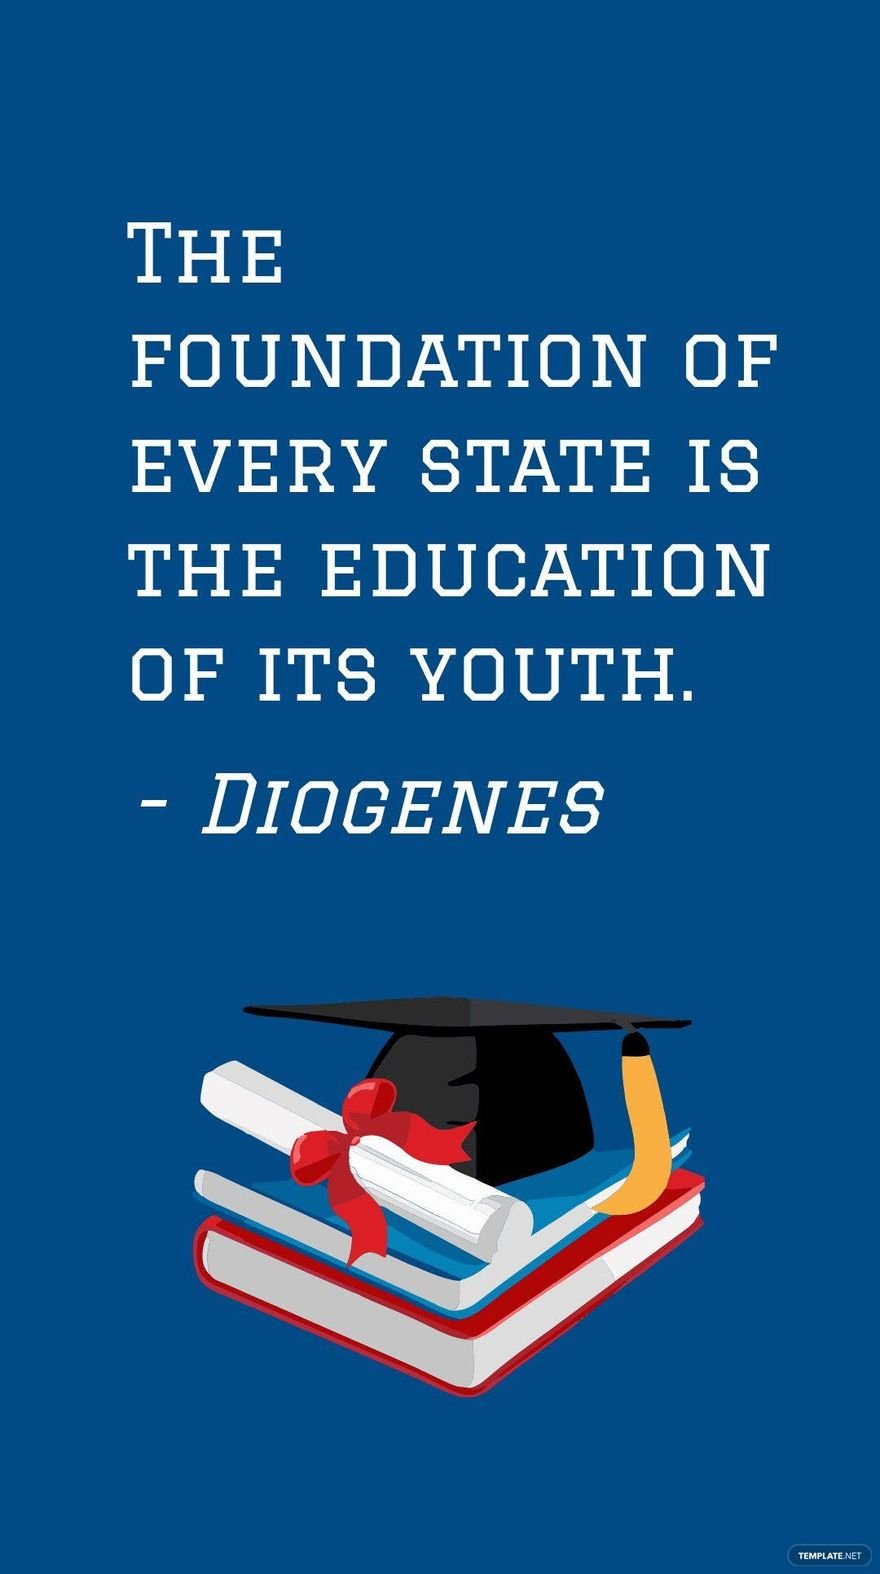 Diogenes - The foundation of every state is the education of its youth.